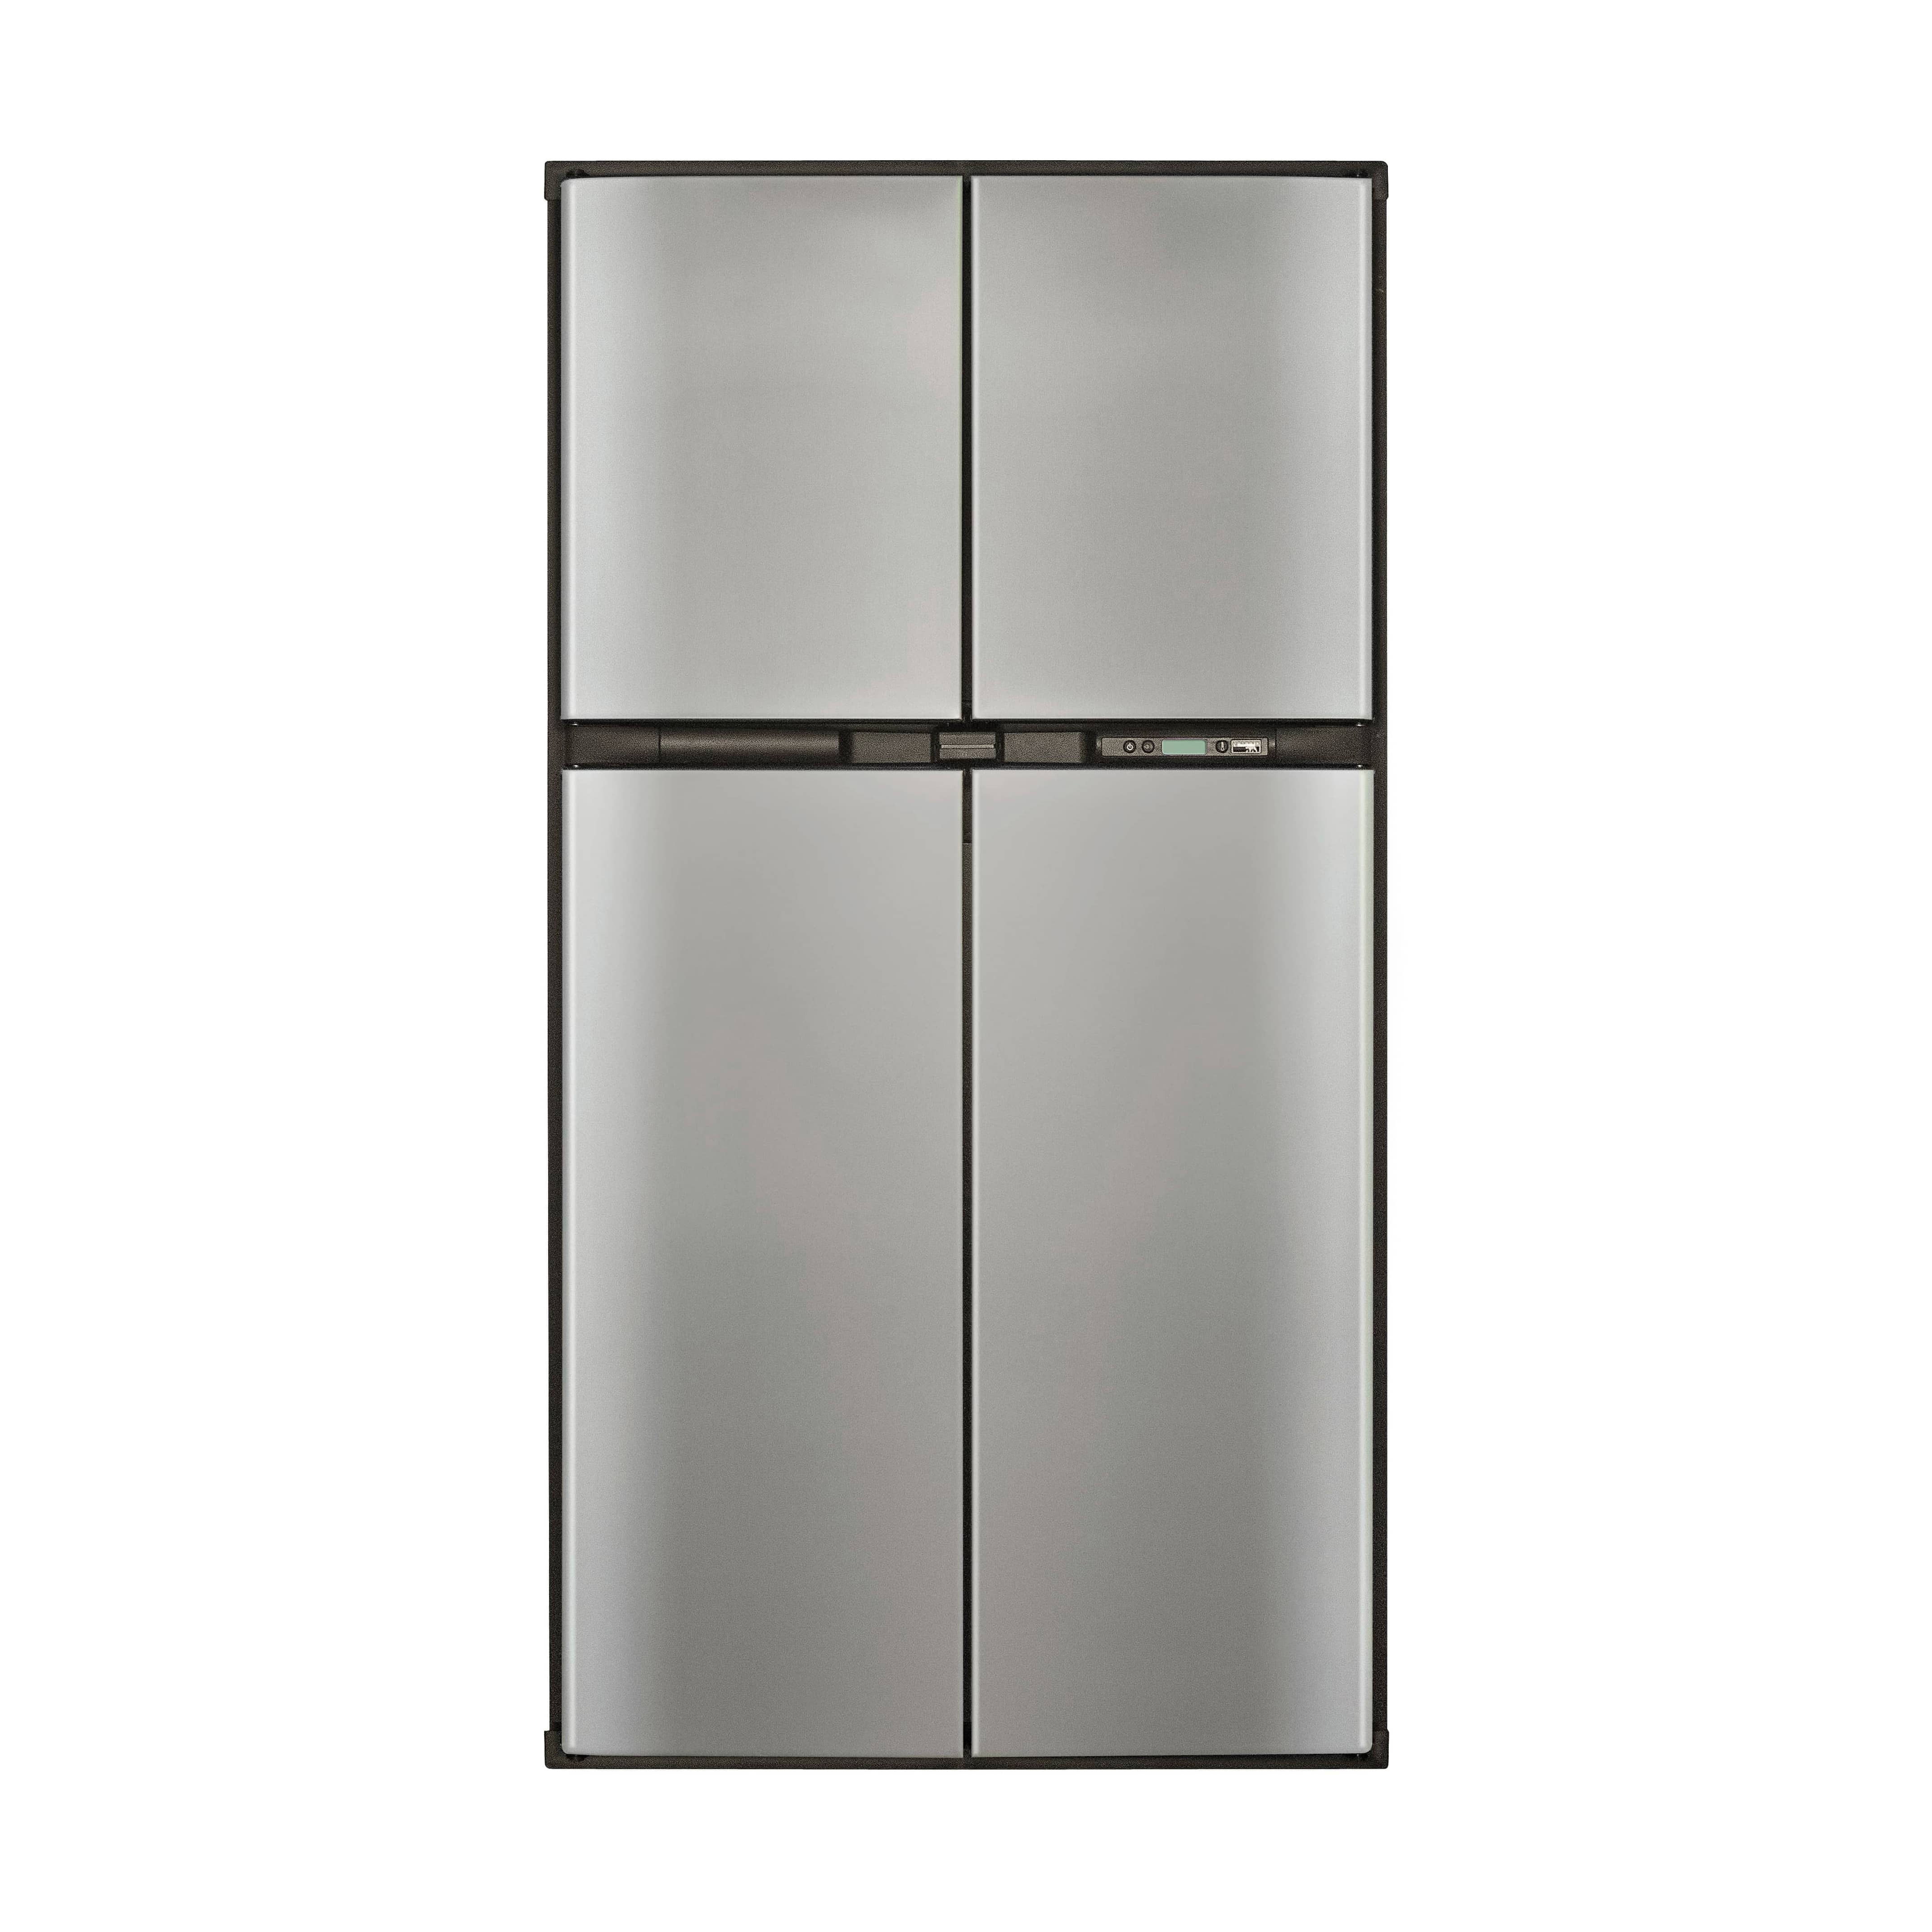 2118 PolarMax - Largest made-for-RV refrigerator from Norcold